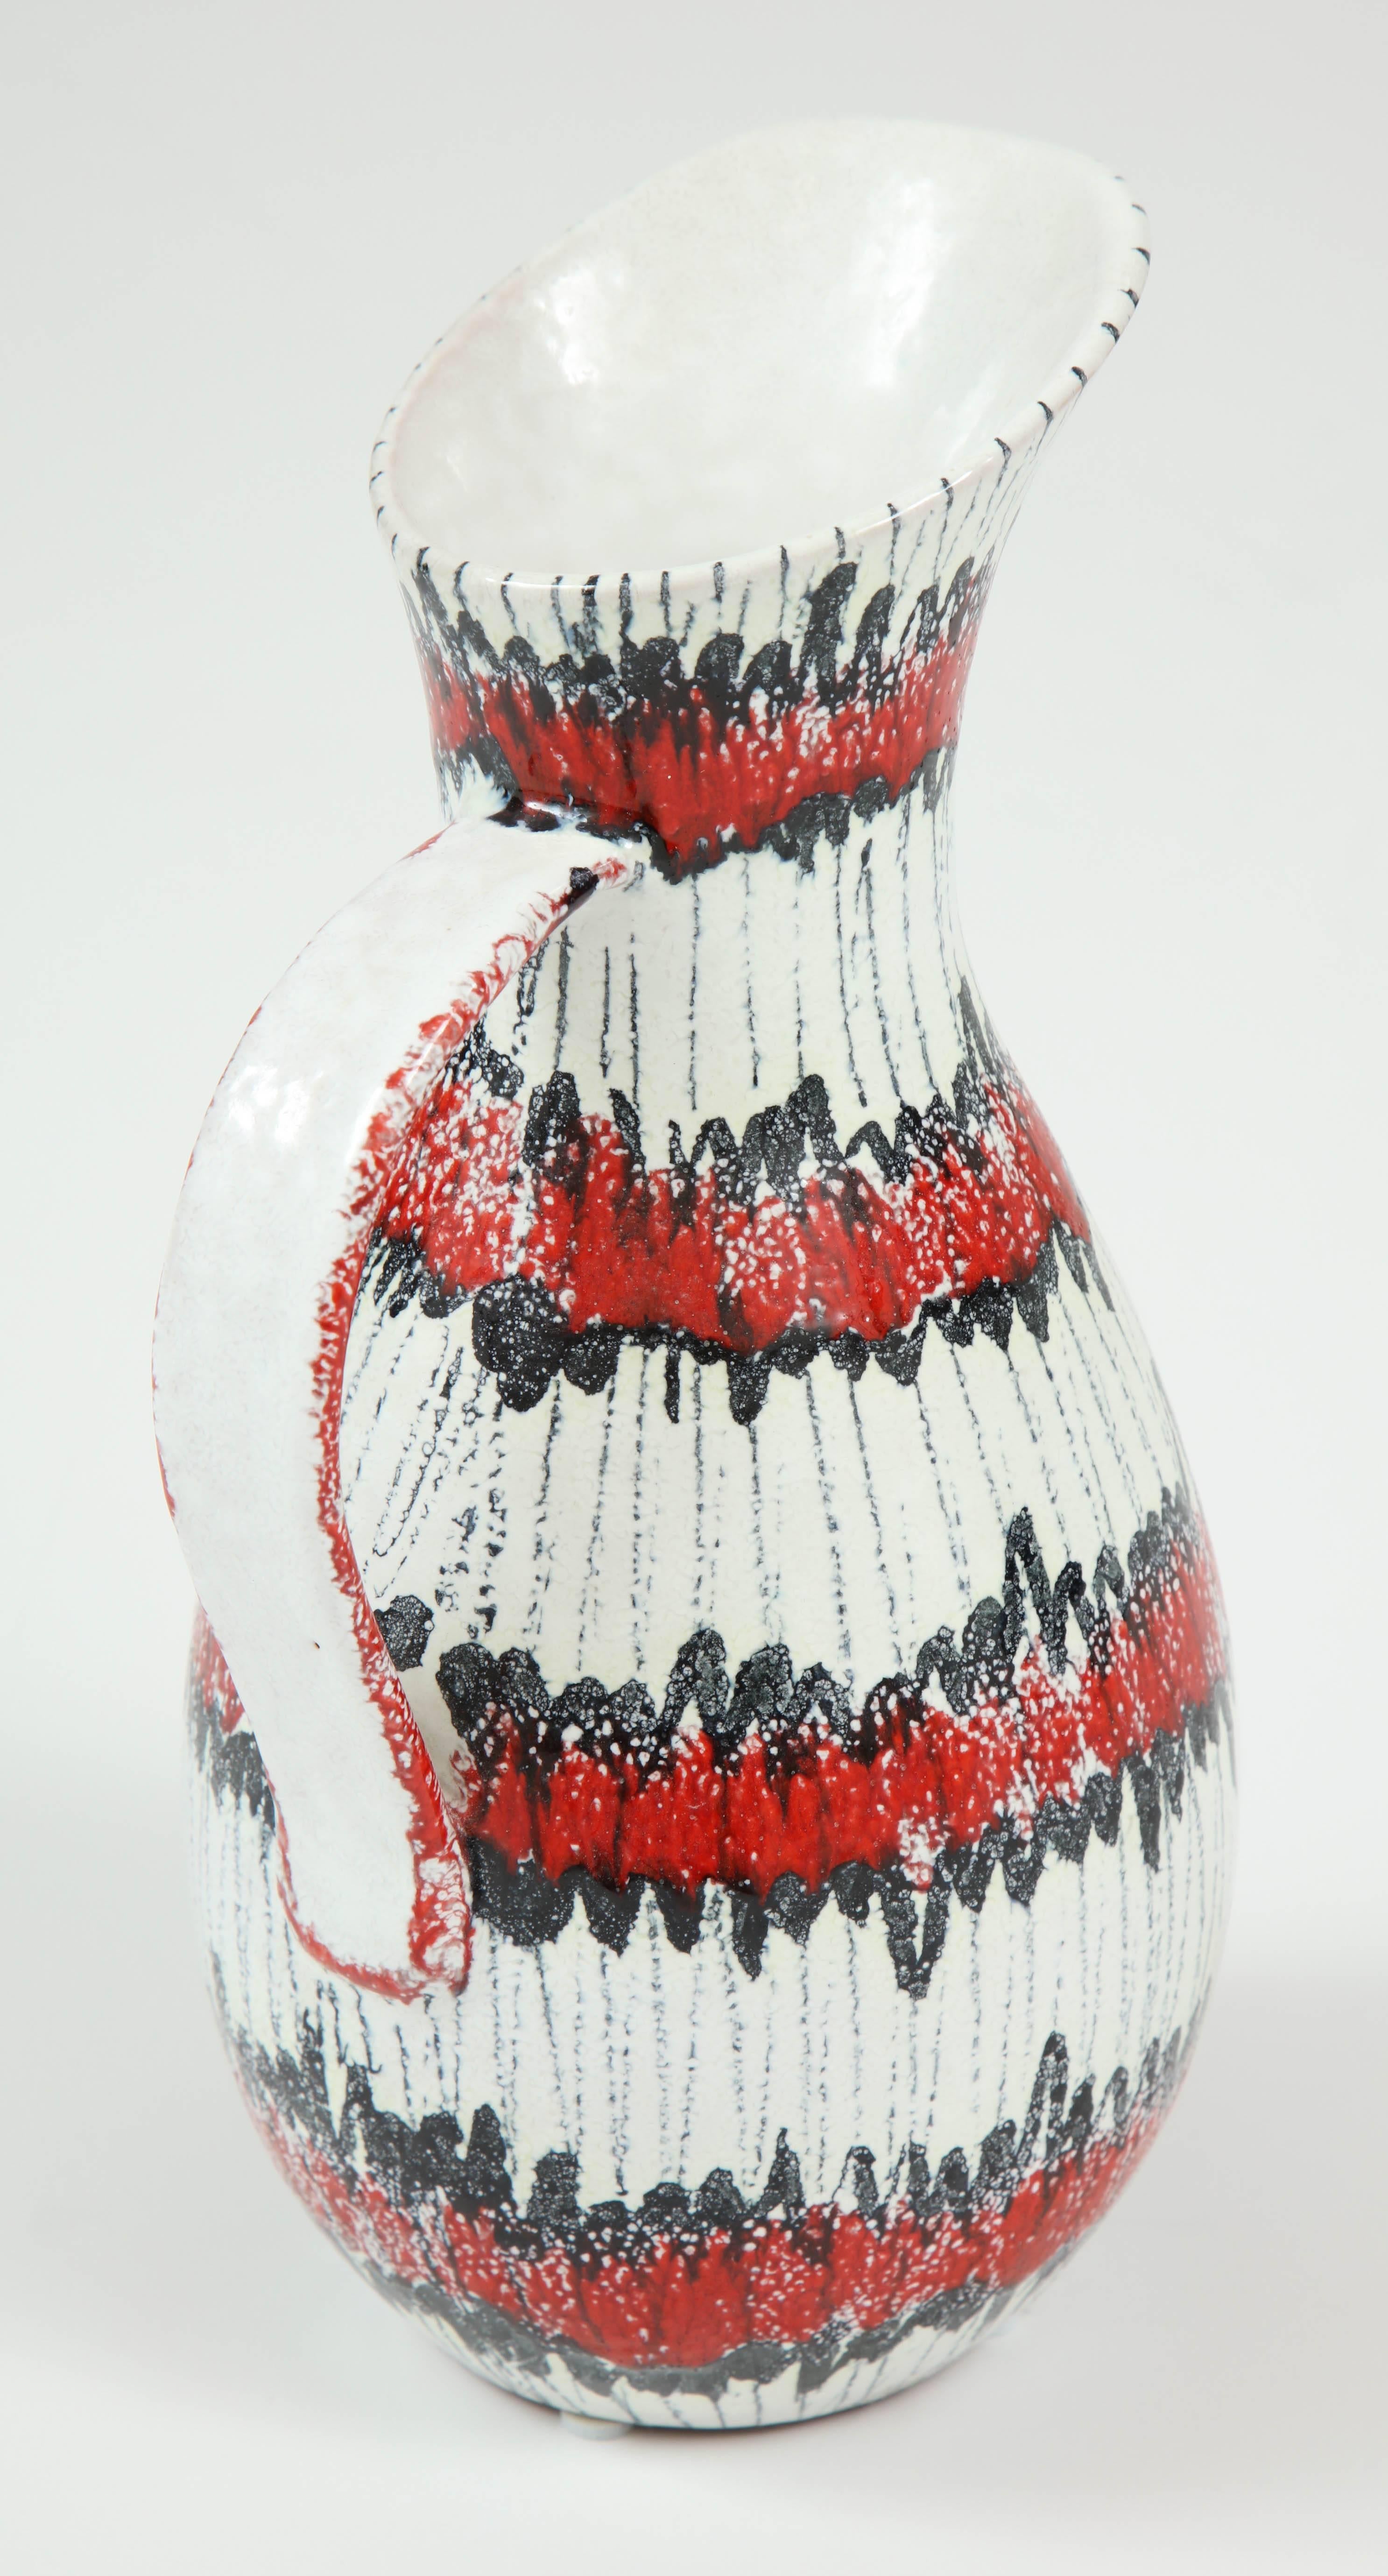 Mid-20th Century Ceramic Pitcher, Red, White and Black, Italy, Midcentury, C 1950, Ceramic For Sale